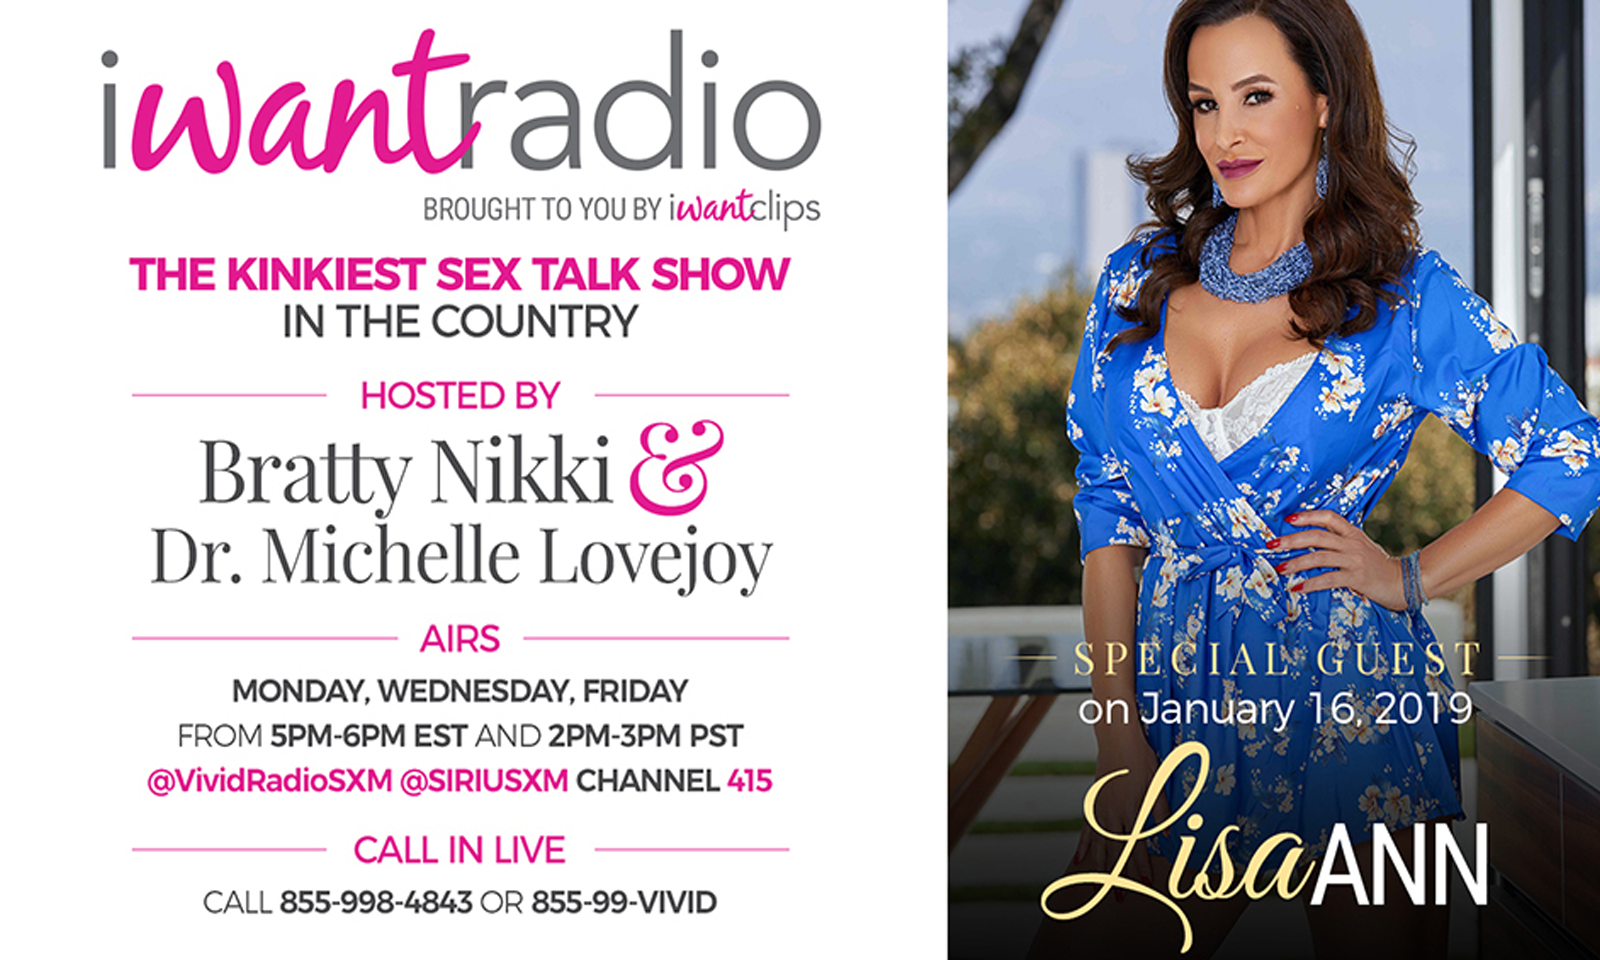 Lisa Ann to Guest on iWantRadio